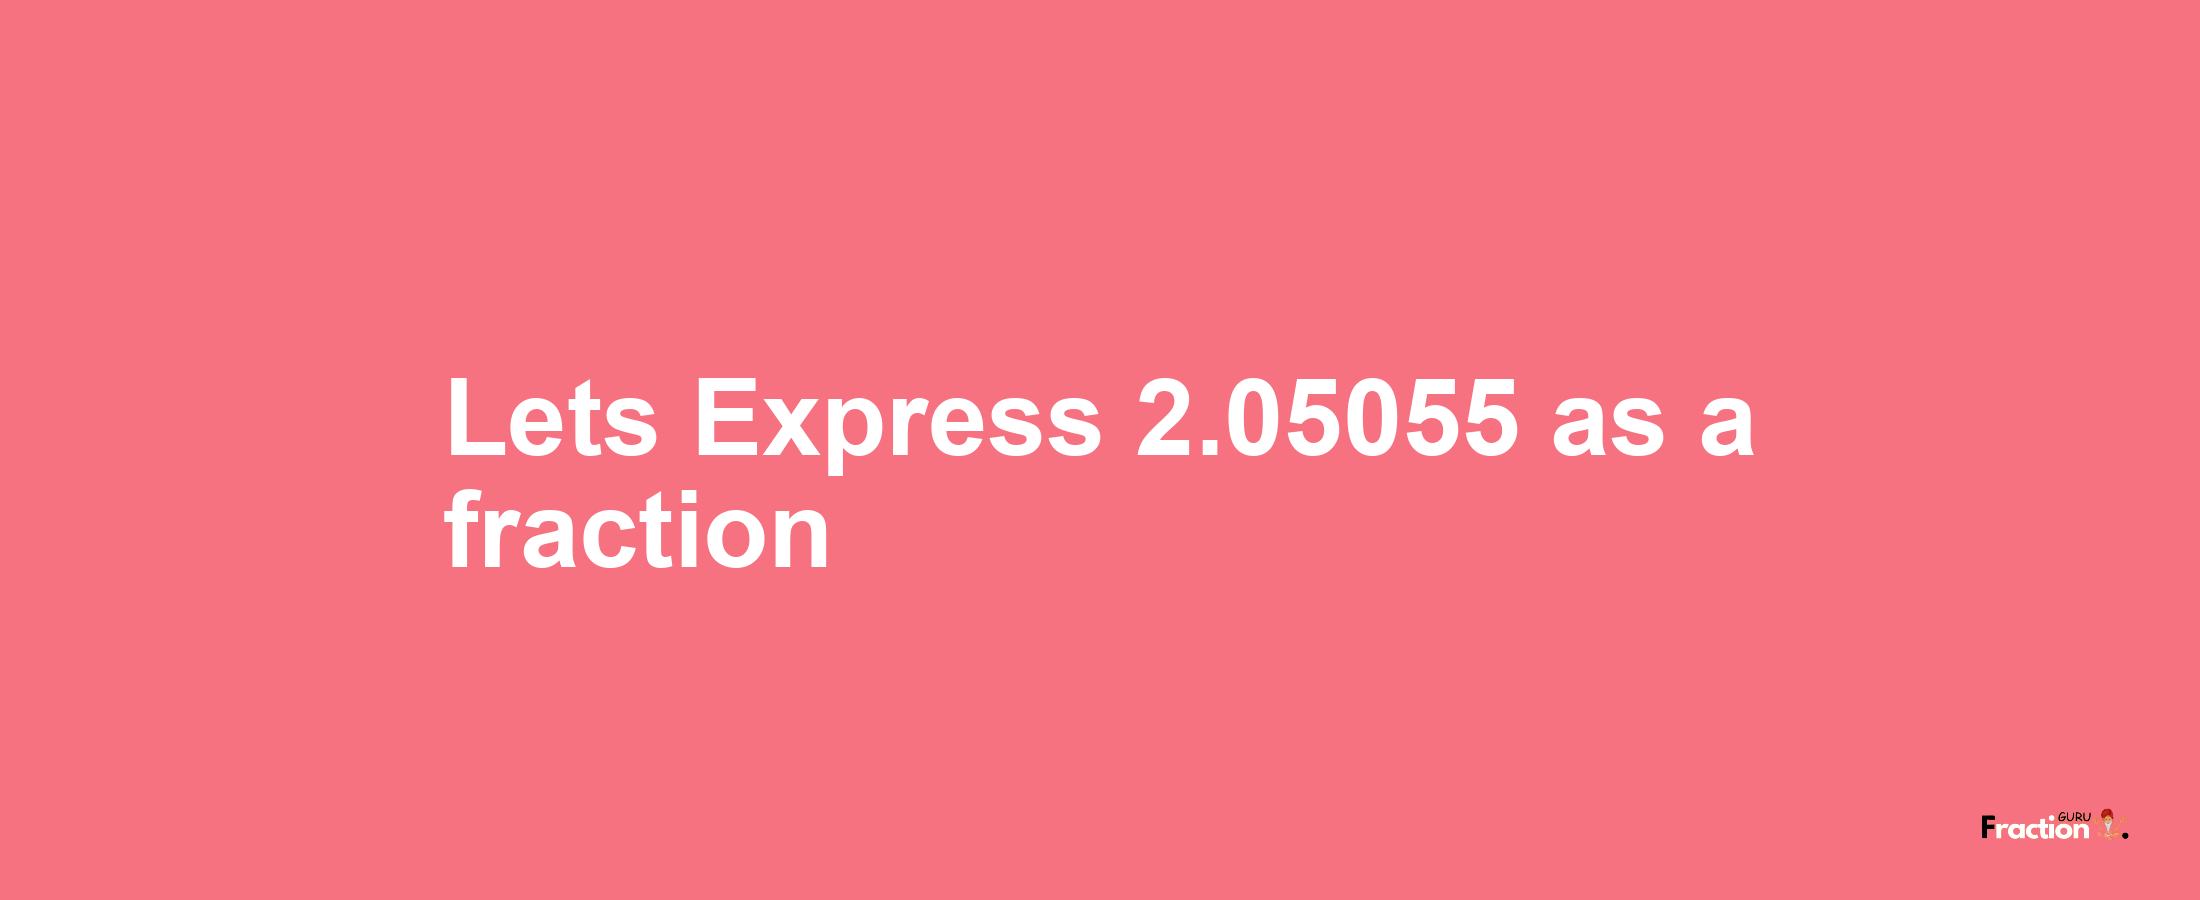 Lets Express 2.05055 as afraction